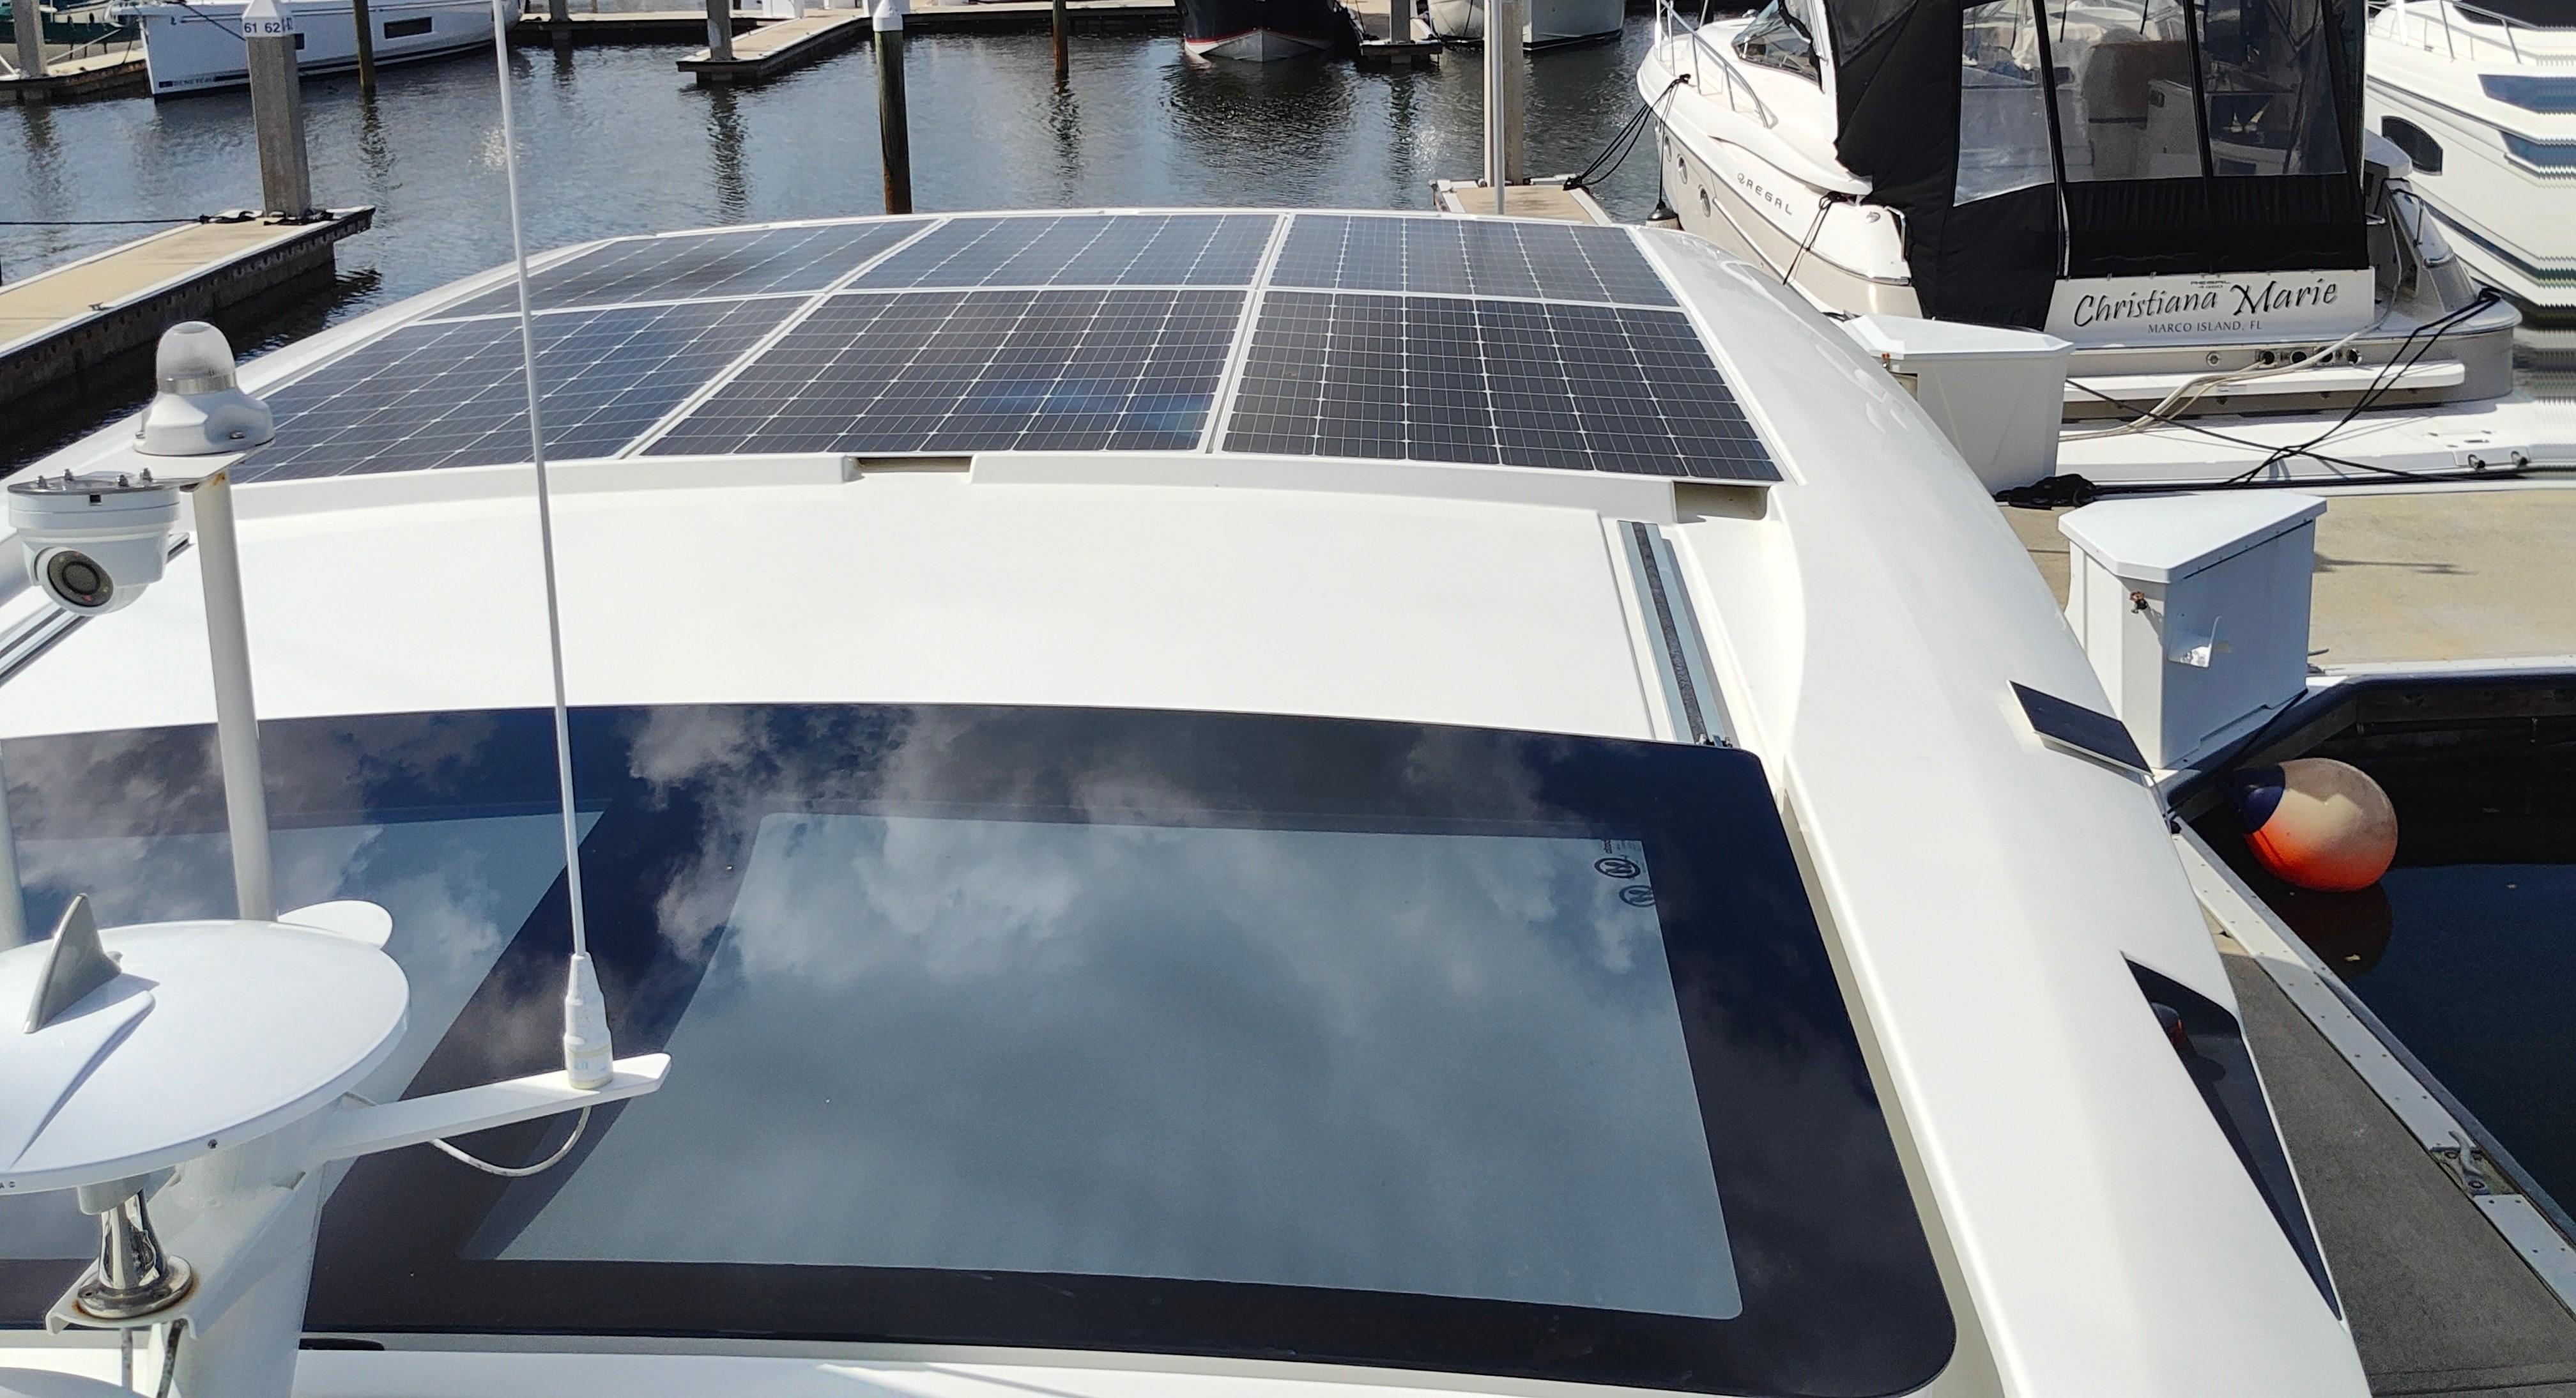 Six solar panels and convertible slide top